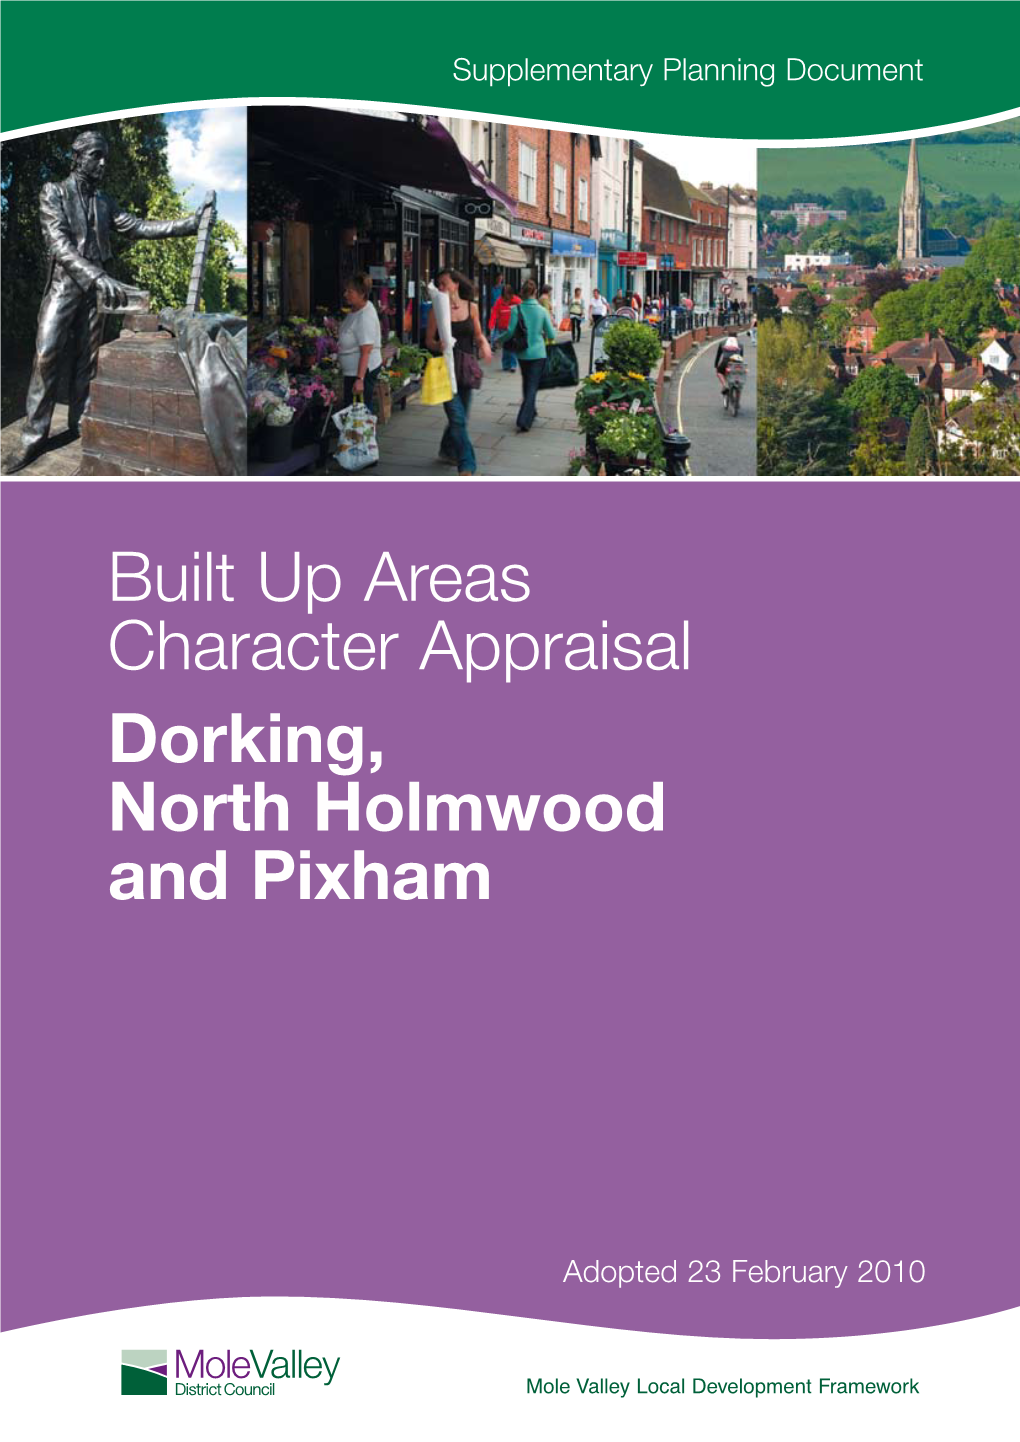 Built up Areas Character Appraisal Dorking, North Holmwood and Pixham